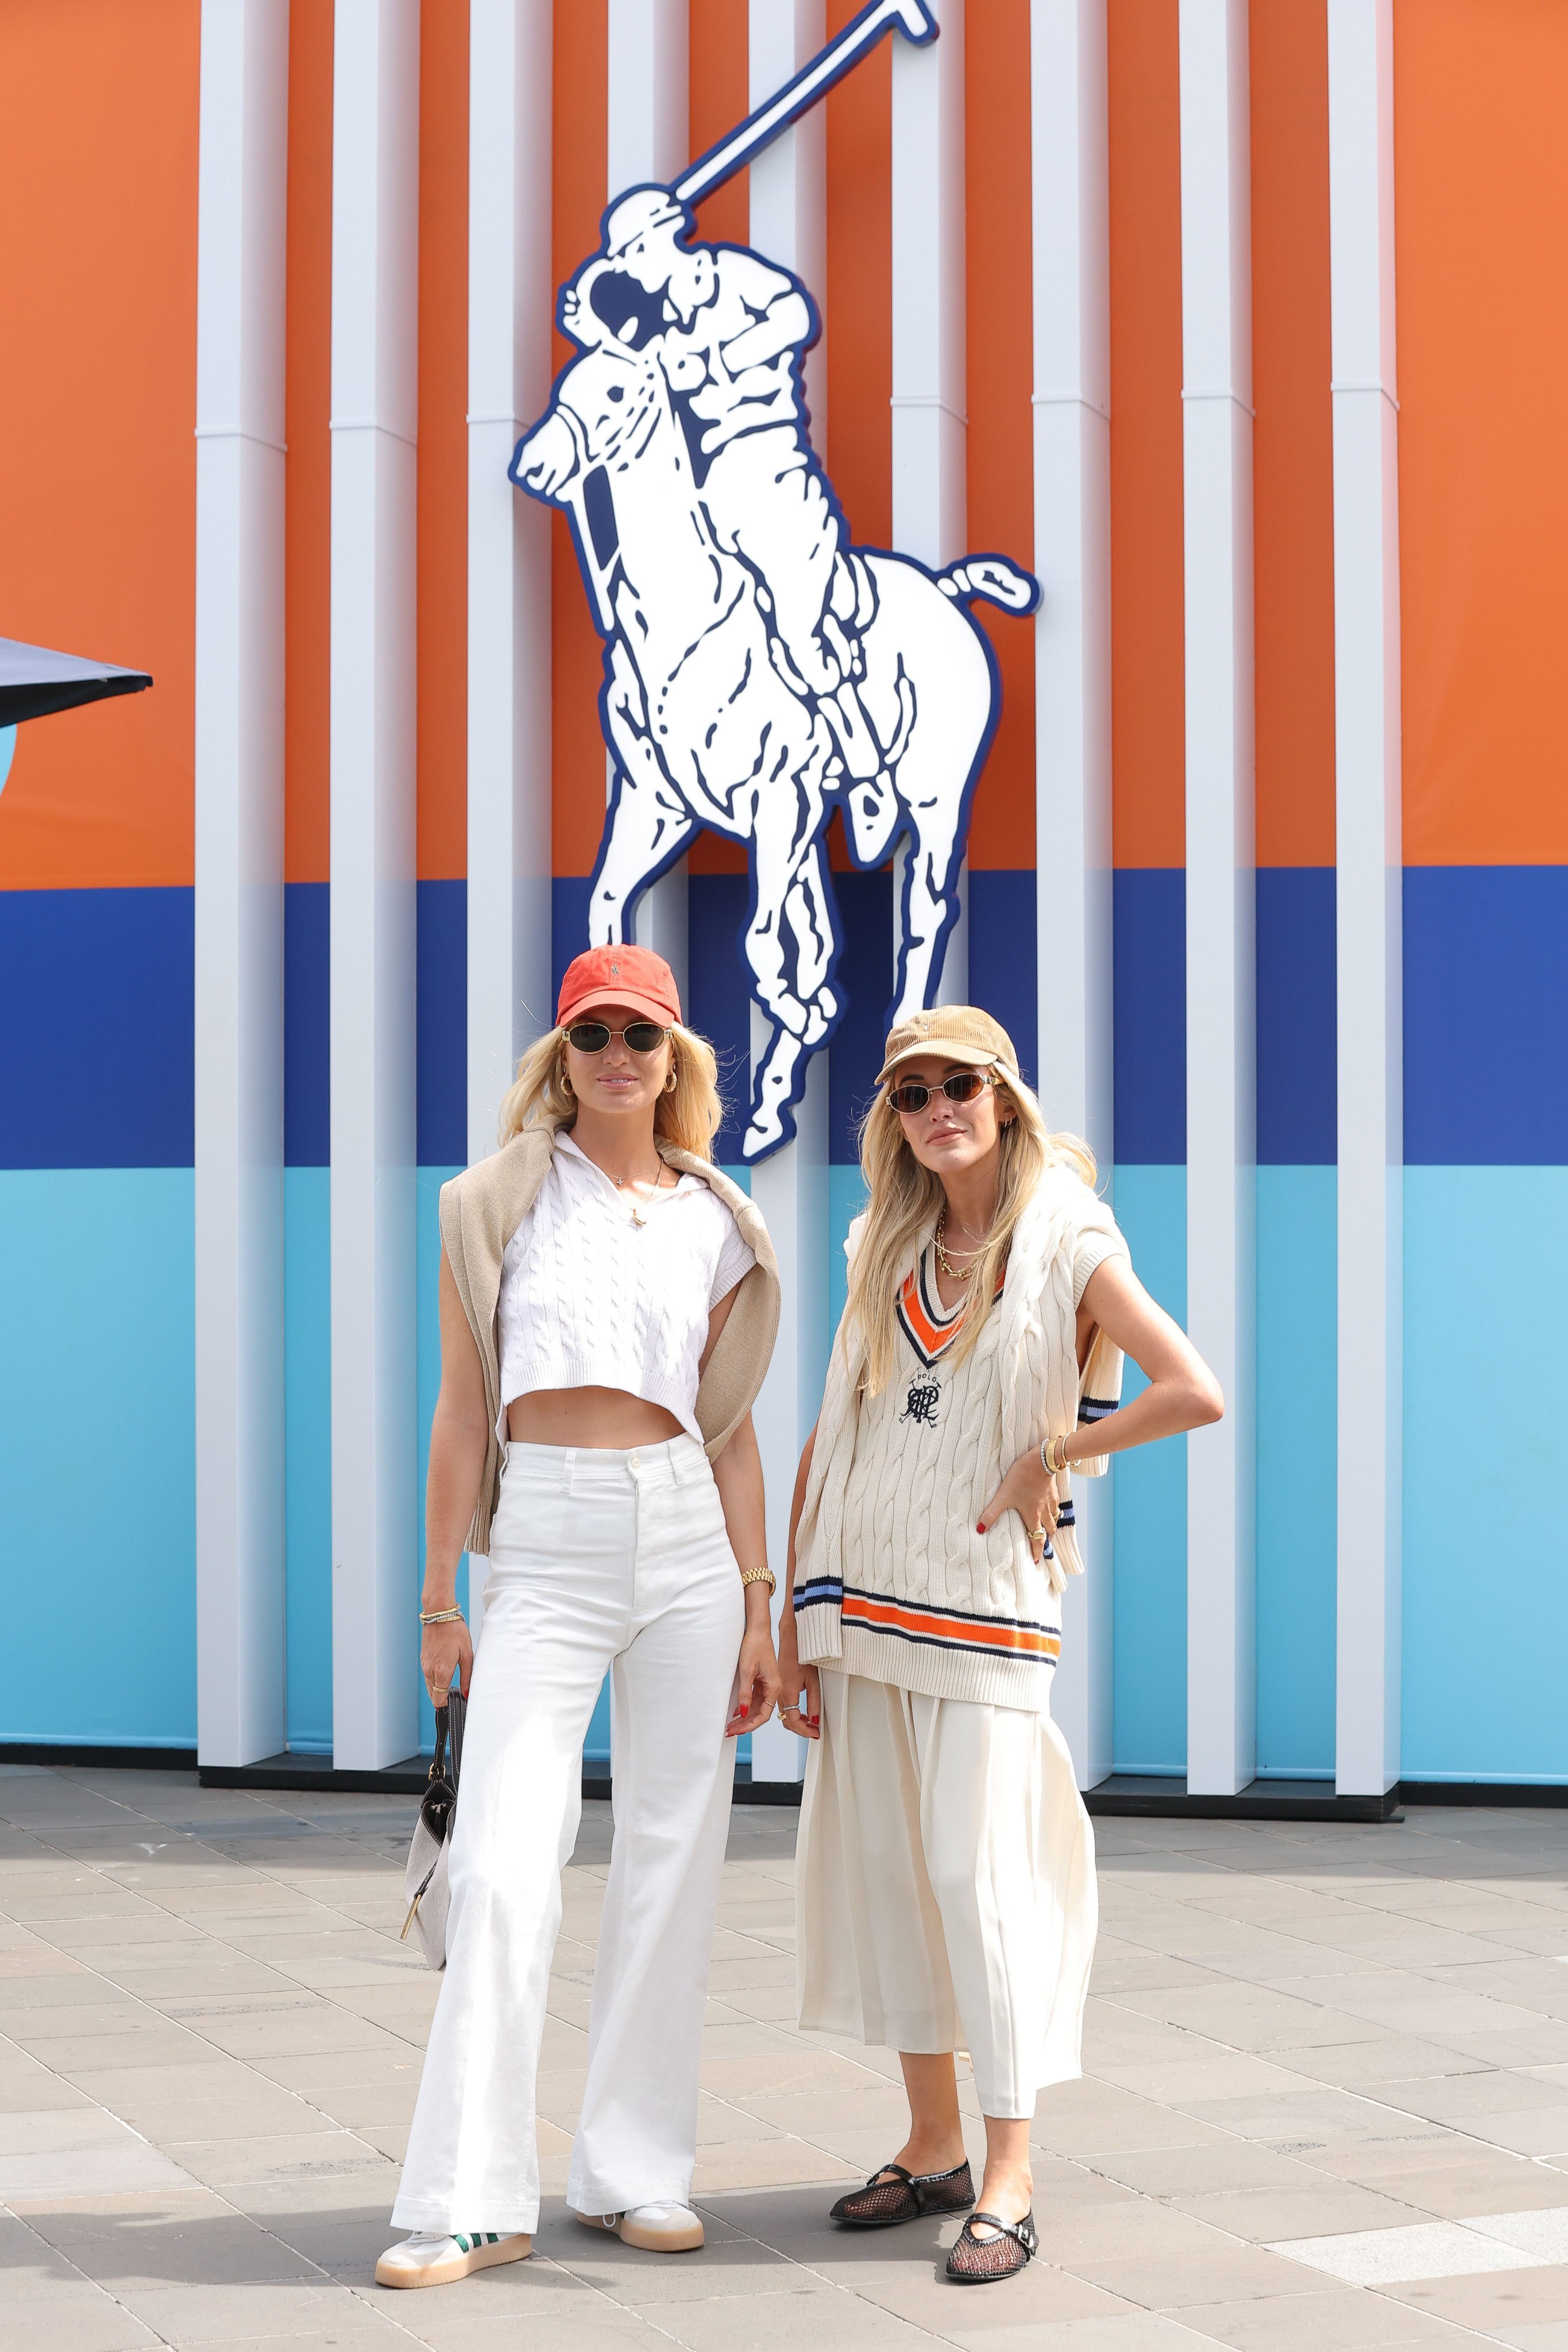 Guests in Ralph Lauren at the Australian Open, January 2024. The “tennis core” trend continues to endure as a sign of wealth and taste through the ages. Photo: Handout